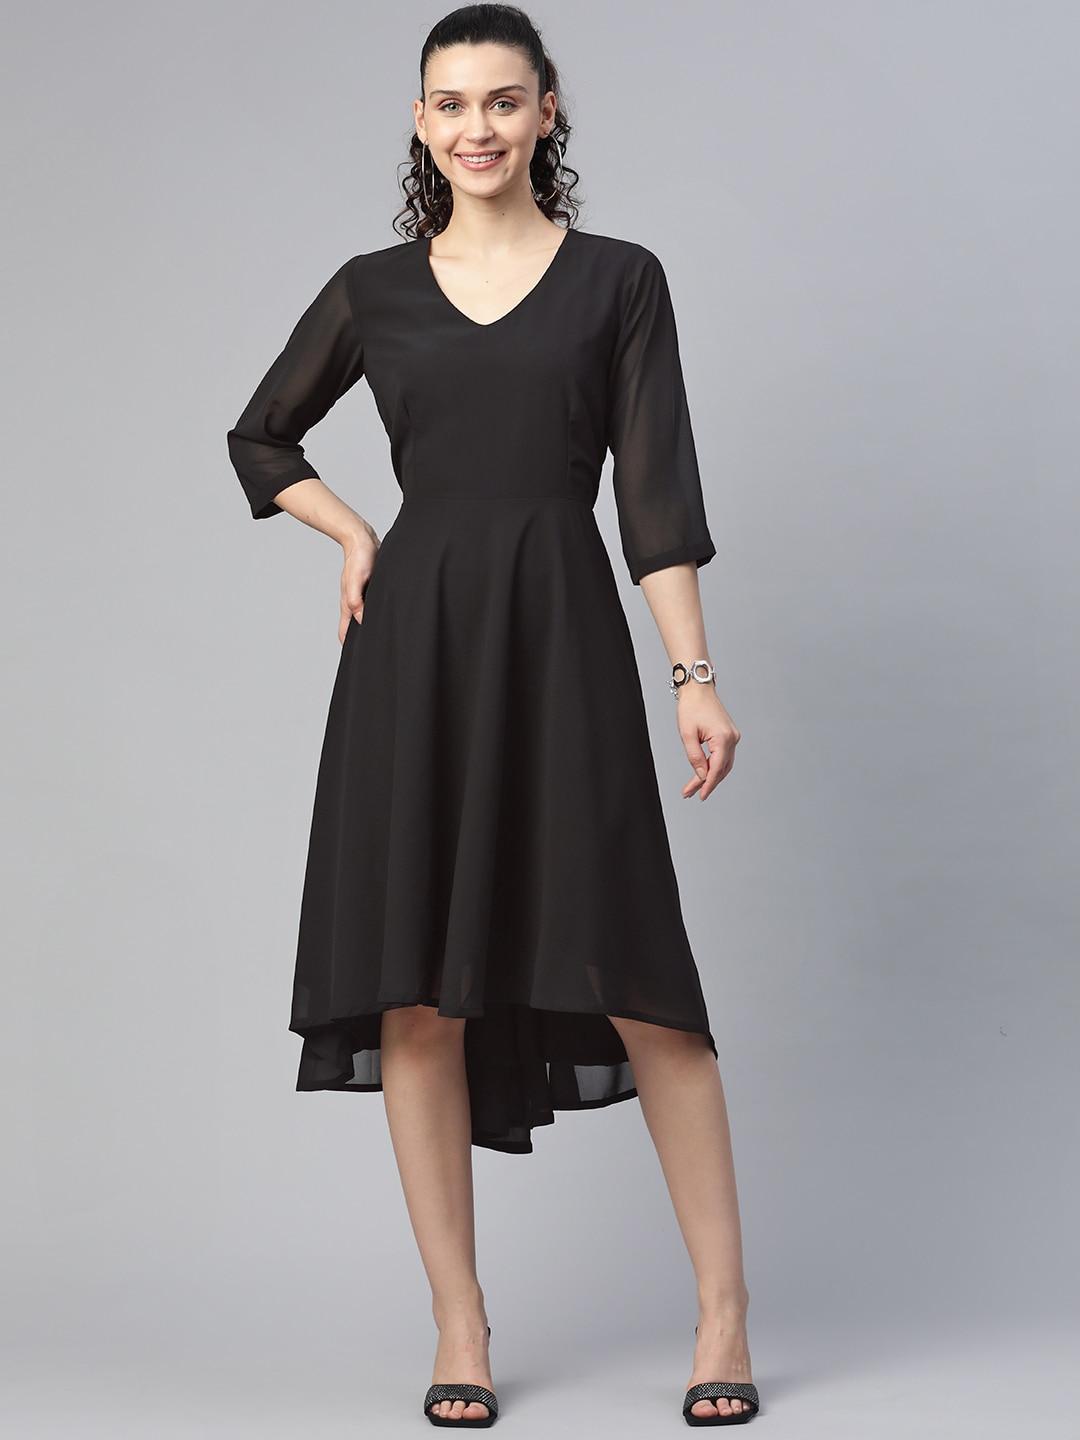 powersutra-black-solid-fit-&-flare-georgette-dress